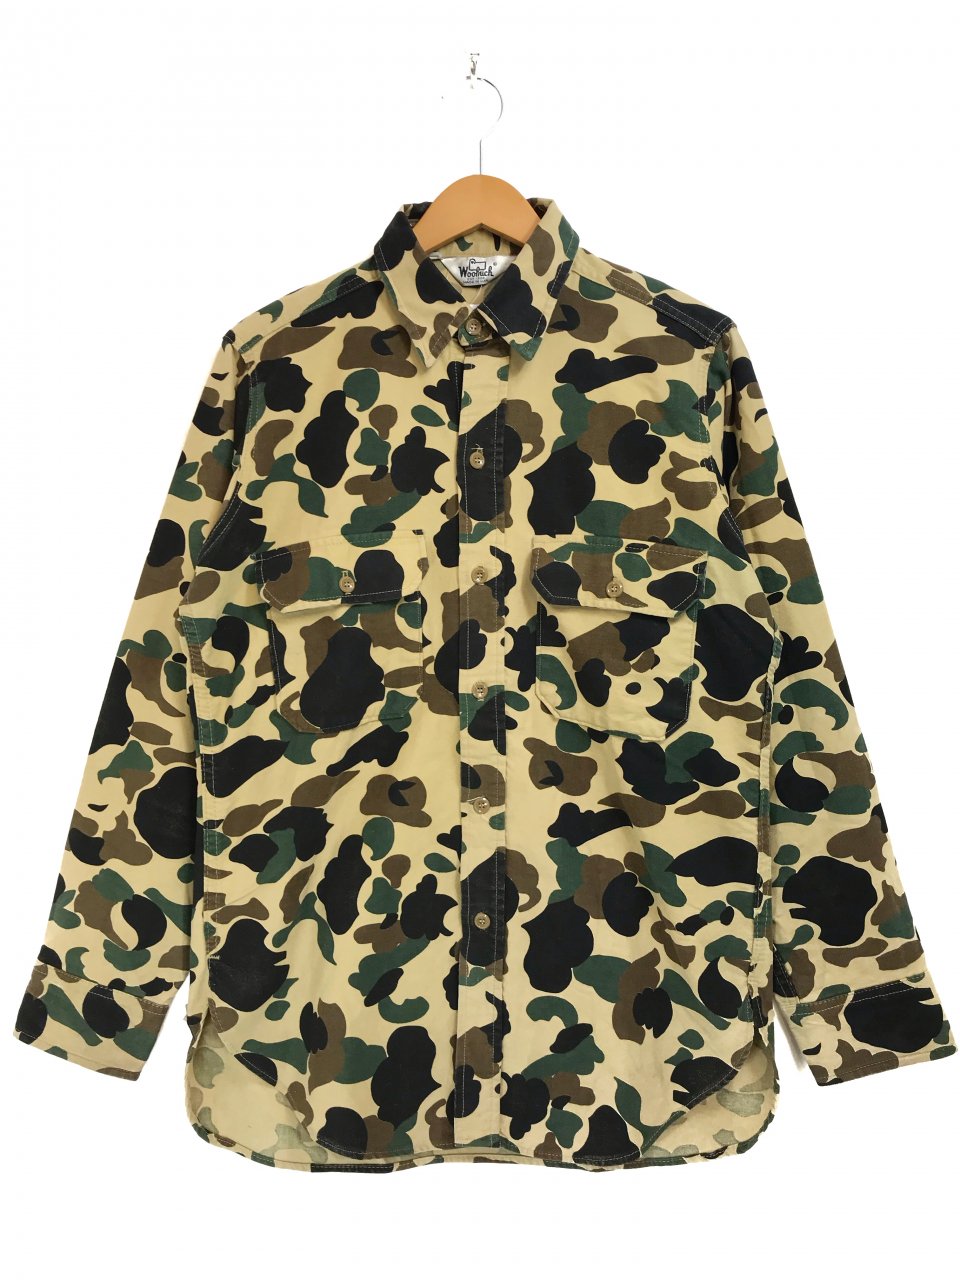 70s vintage woolrich camouflage shirt約61cm着丈 - シャツ